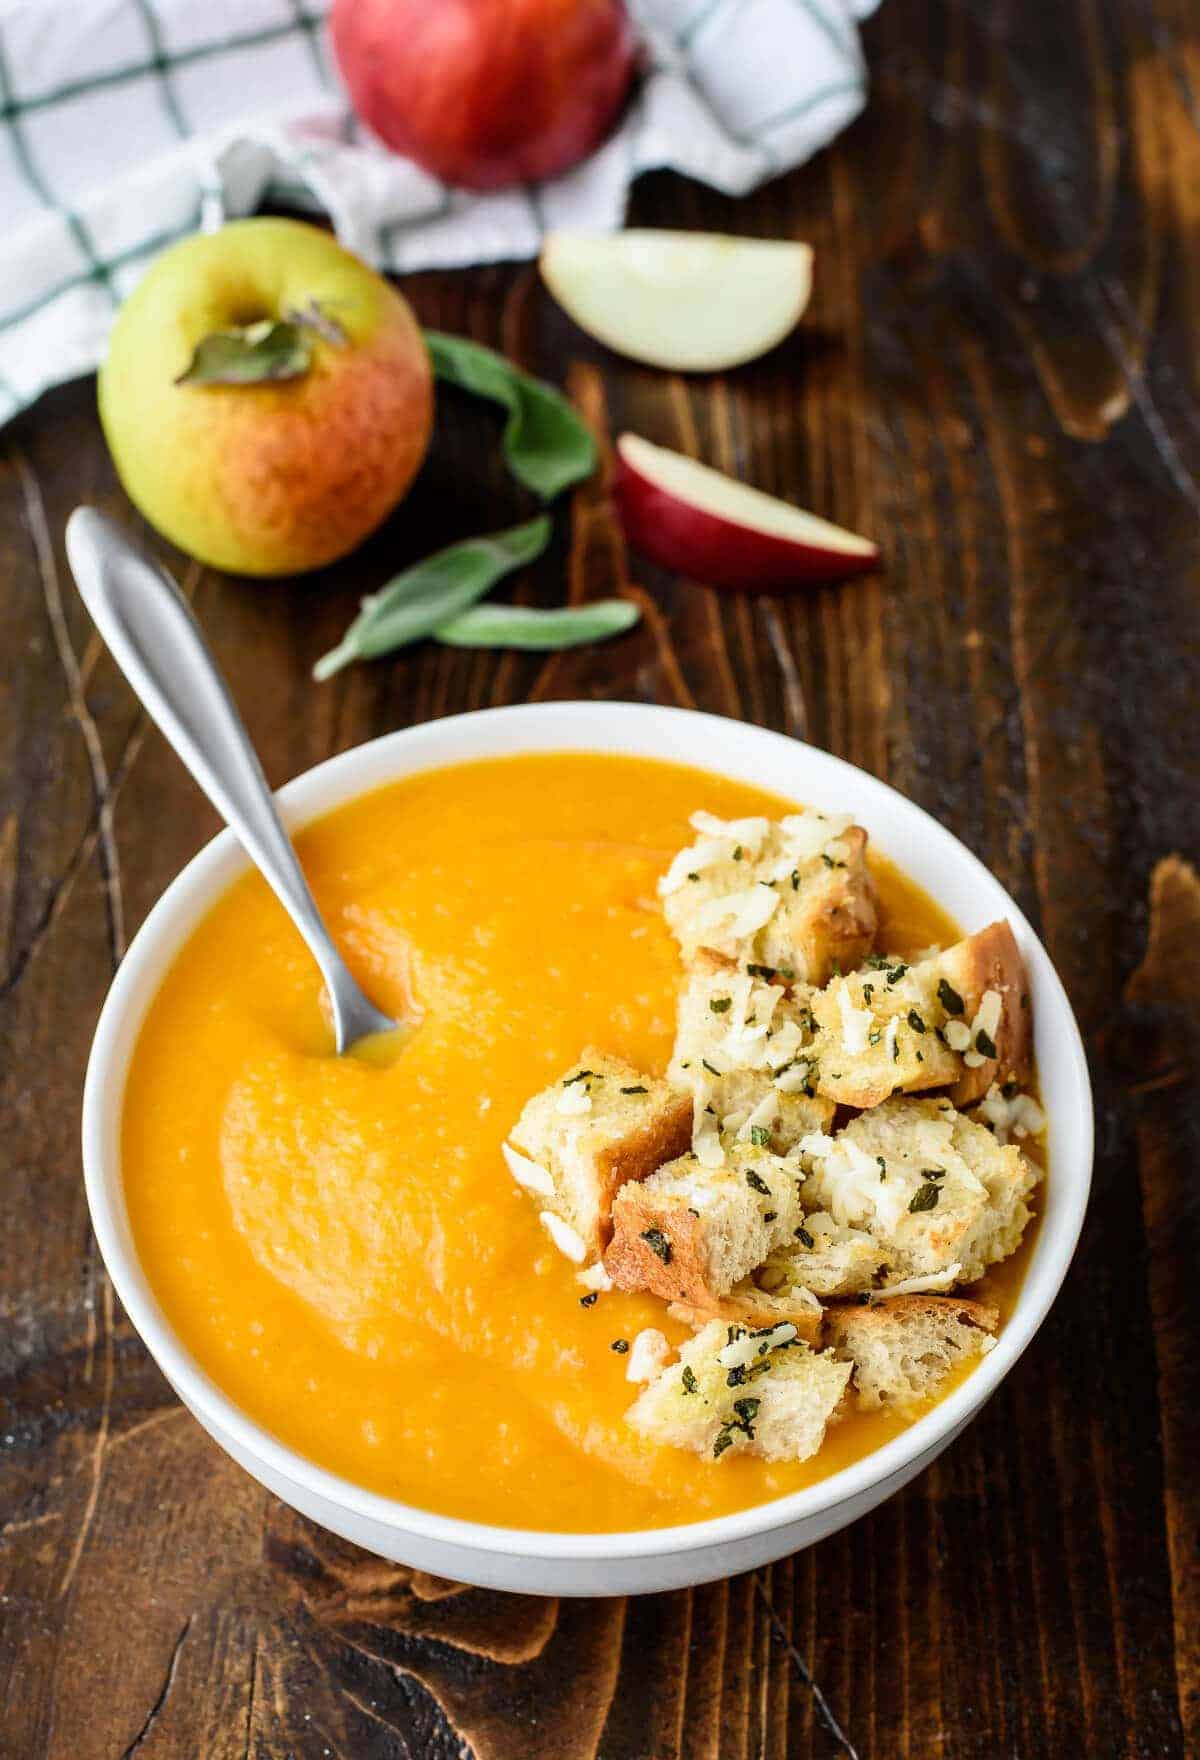 Butternut squash and apple soup with cheddar croutons